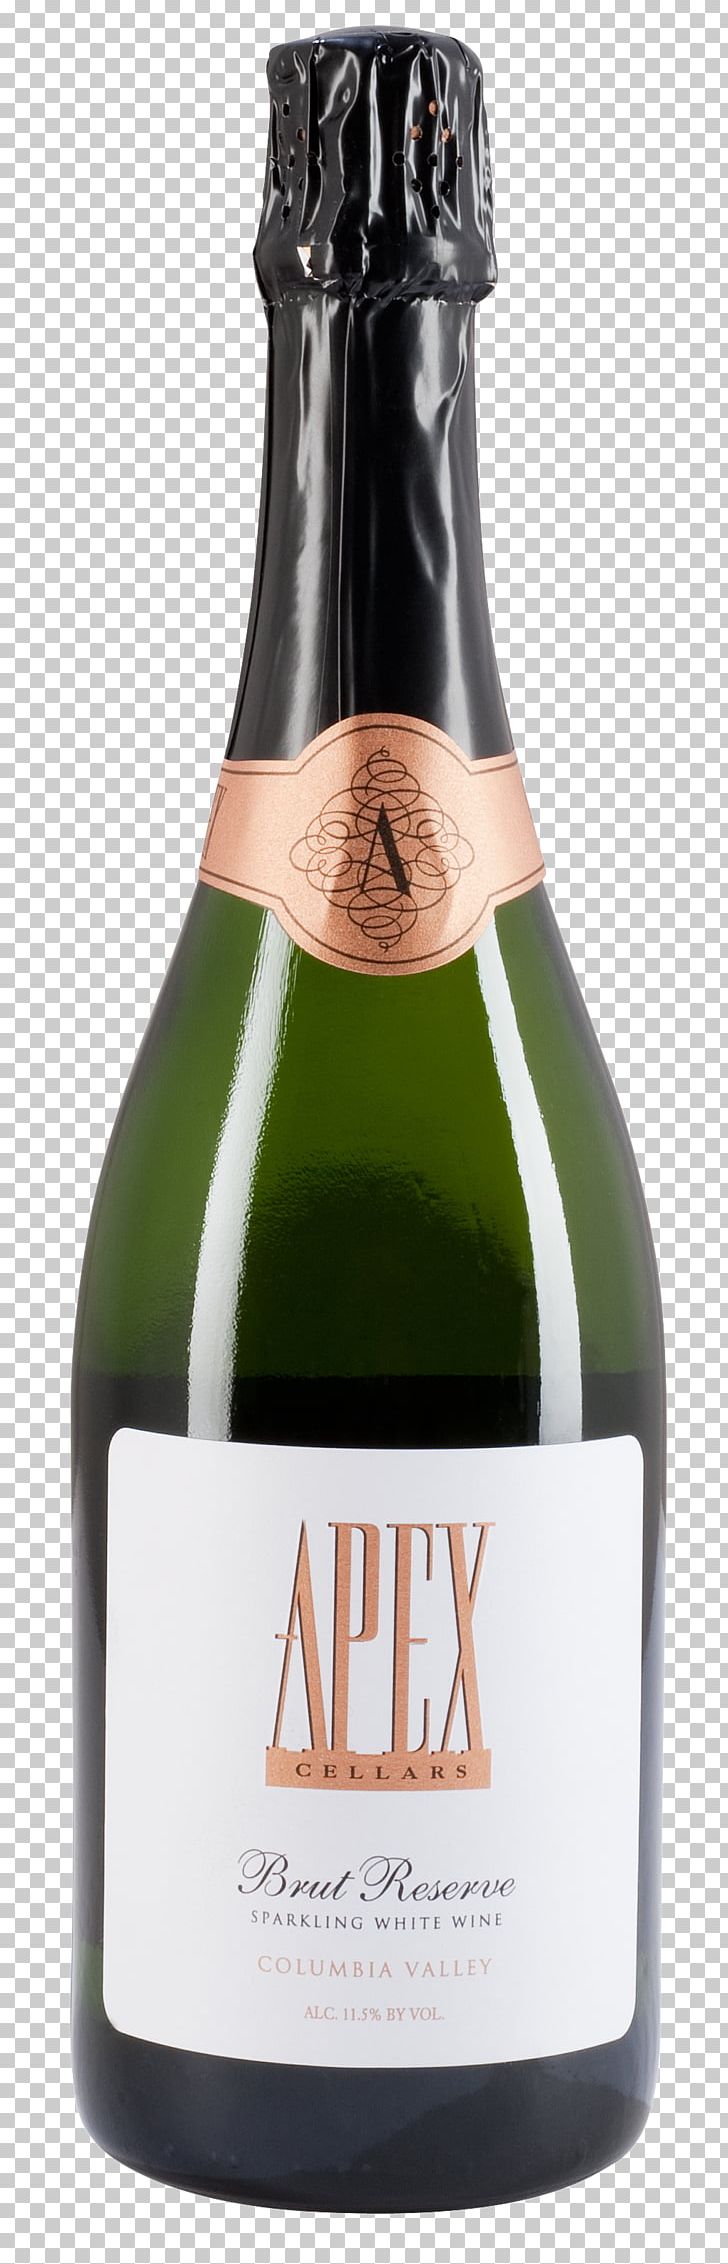 Champagne Dessert Wine Glass Bottle Liqueur Columbia Valley AVA PNG, Clipart, Alcoholic Beverage, Bottle, Champagne, Chardonnay, Columbia Valley Ava Free PNG Download